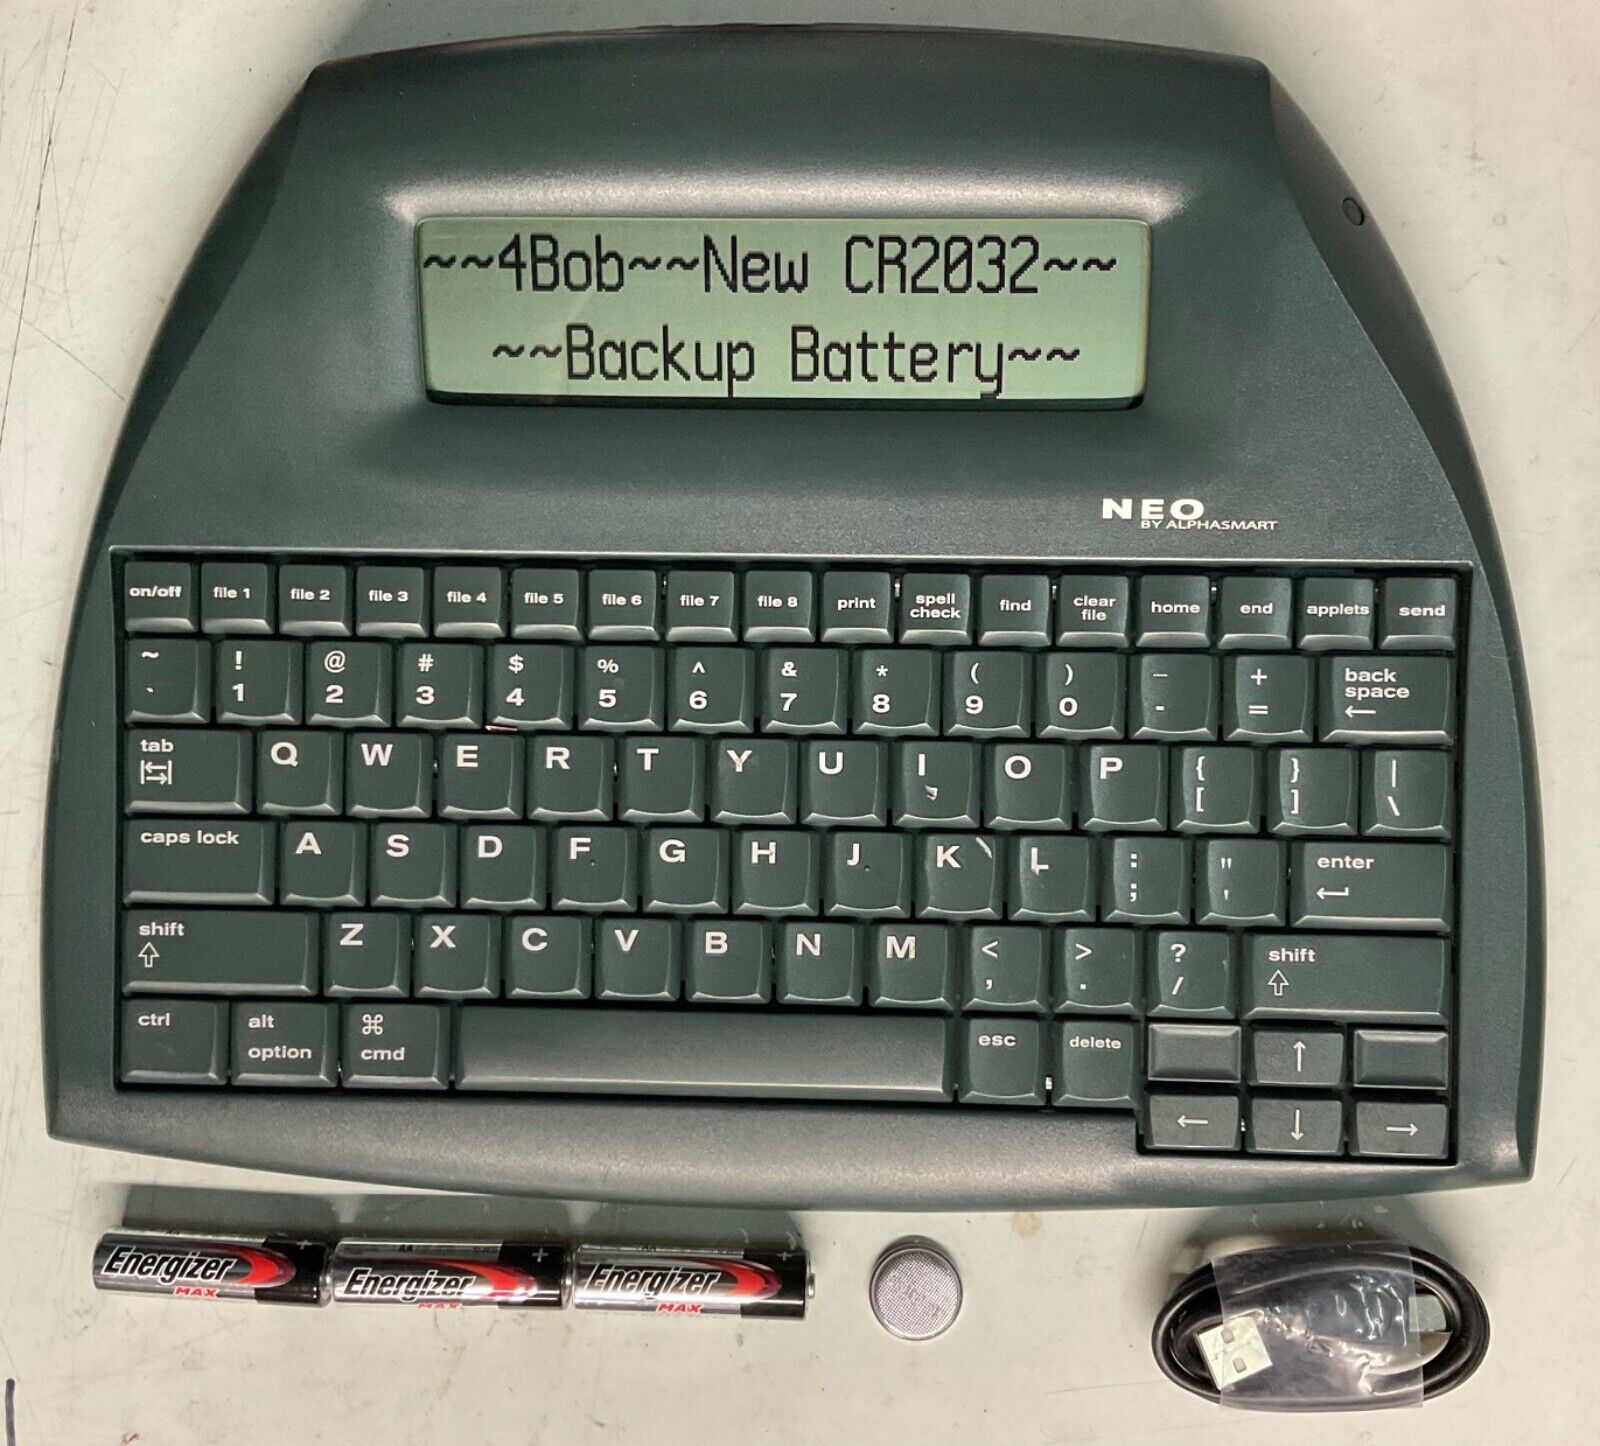 AlphaSmart NEO TESTED ✅CR2032 REPLACED✅ Word Processor NEW BATTERIES USB CABLE